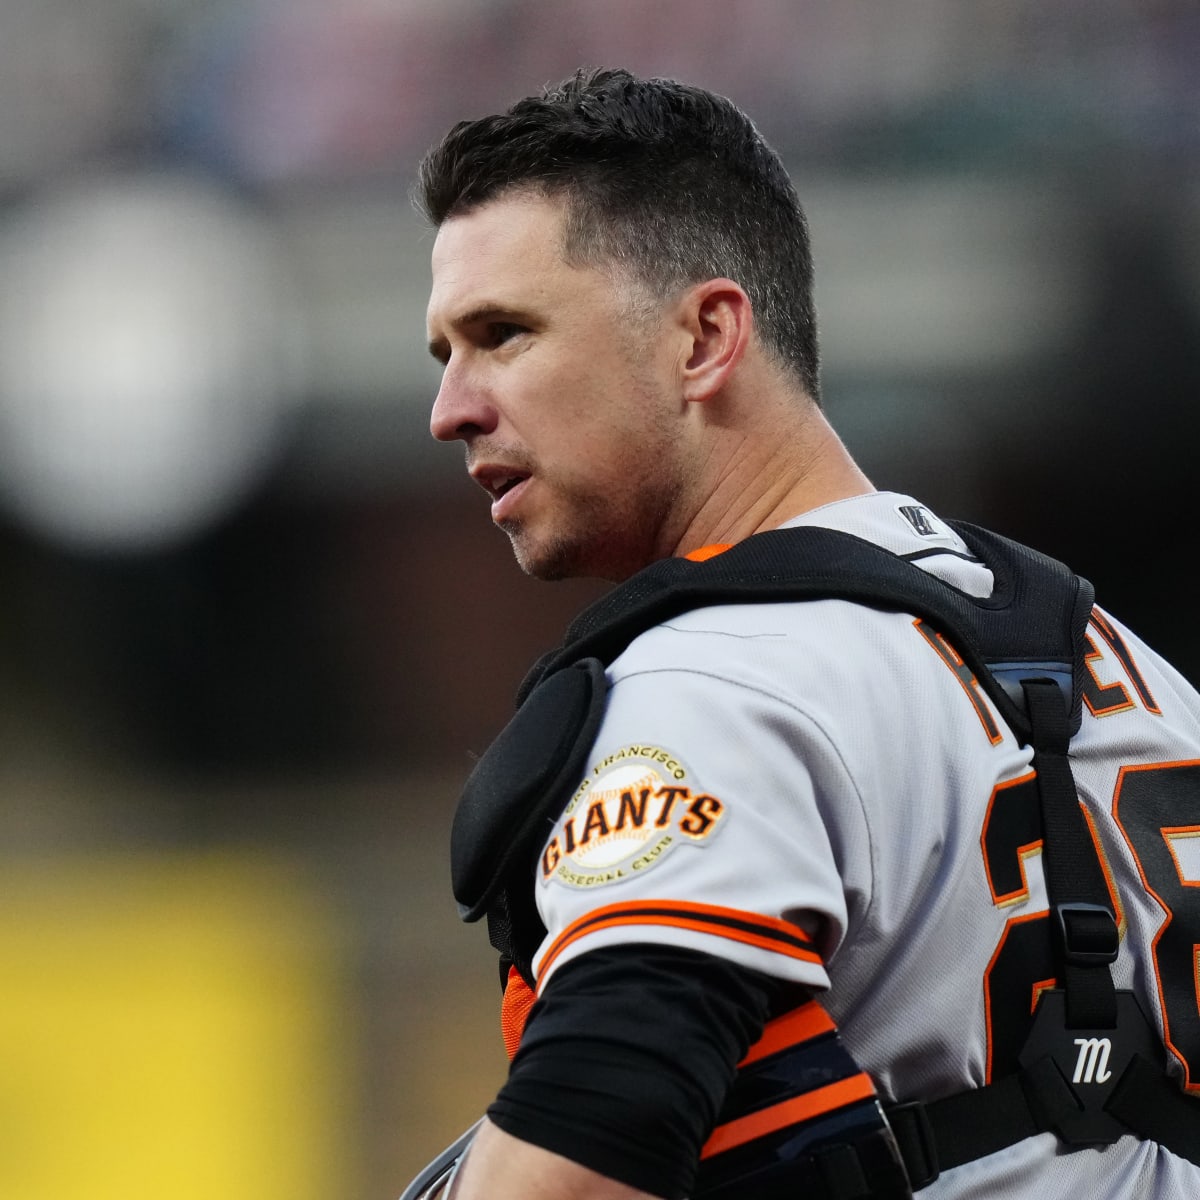 Giant among Giants: Buster Posey retires near the top of his game